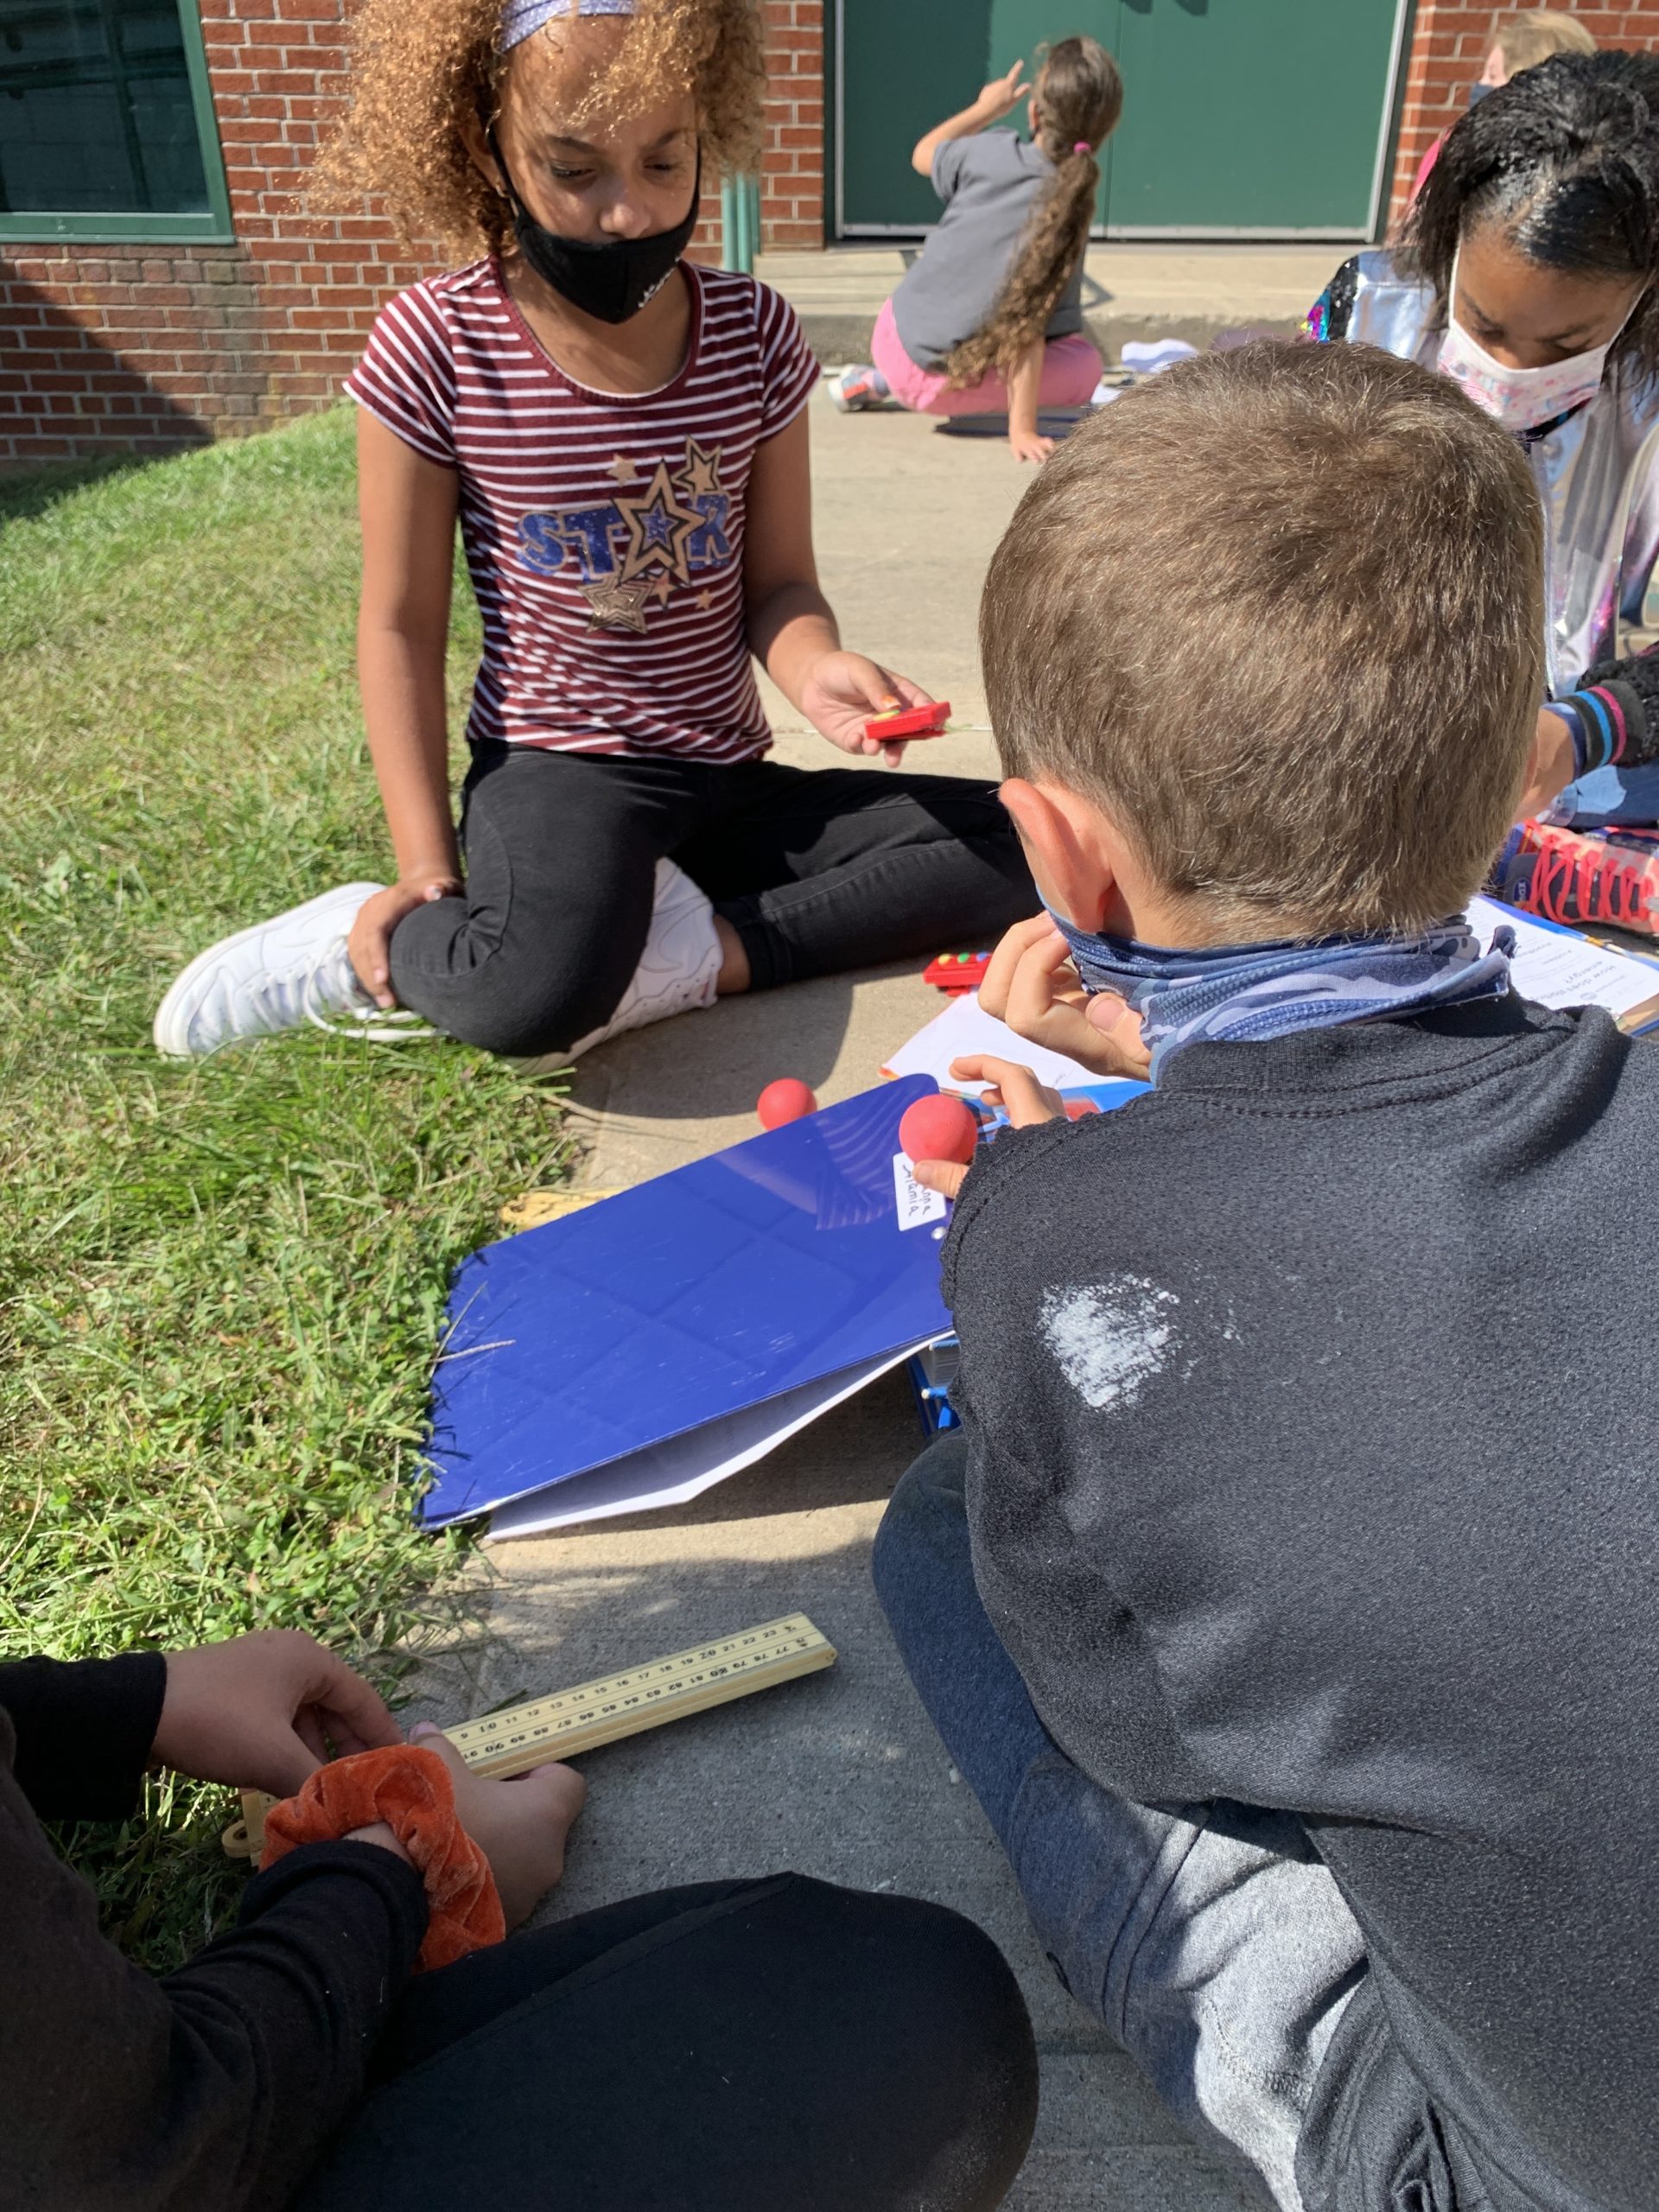 Students at East Quogue Elementary School, including Angelia Daniels, Genesis Jenkins and Marley Serrell, apply their knowledge of the scientific method and energy to conduct experiments, observing changes with thermal energy using skittles, and learned how speed is affected by height.